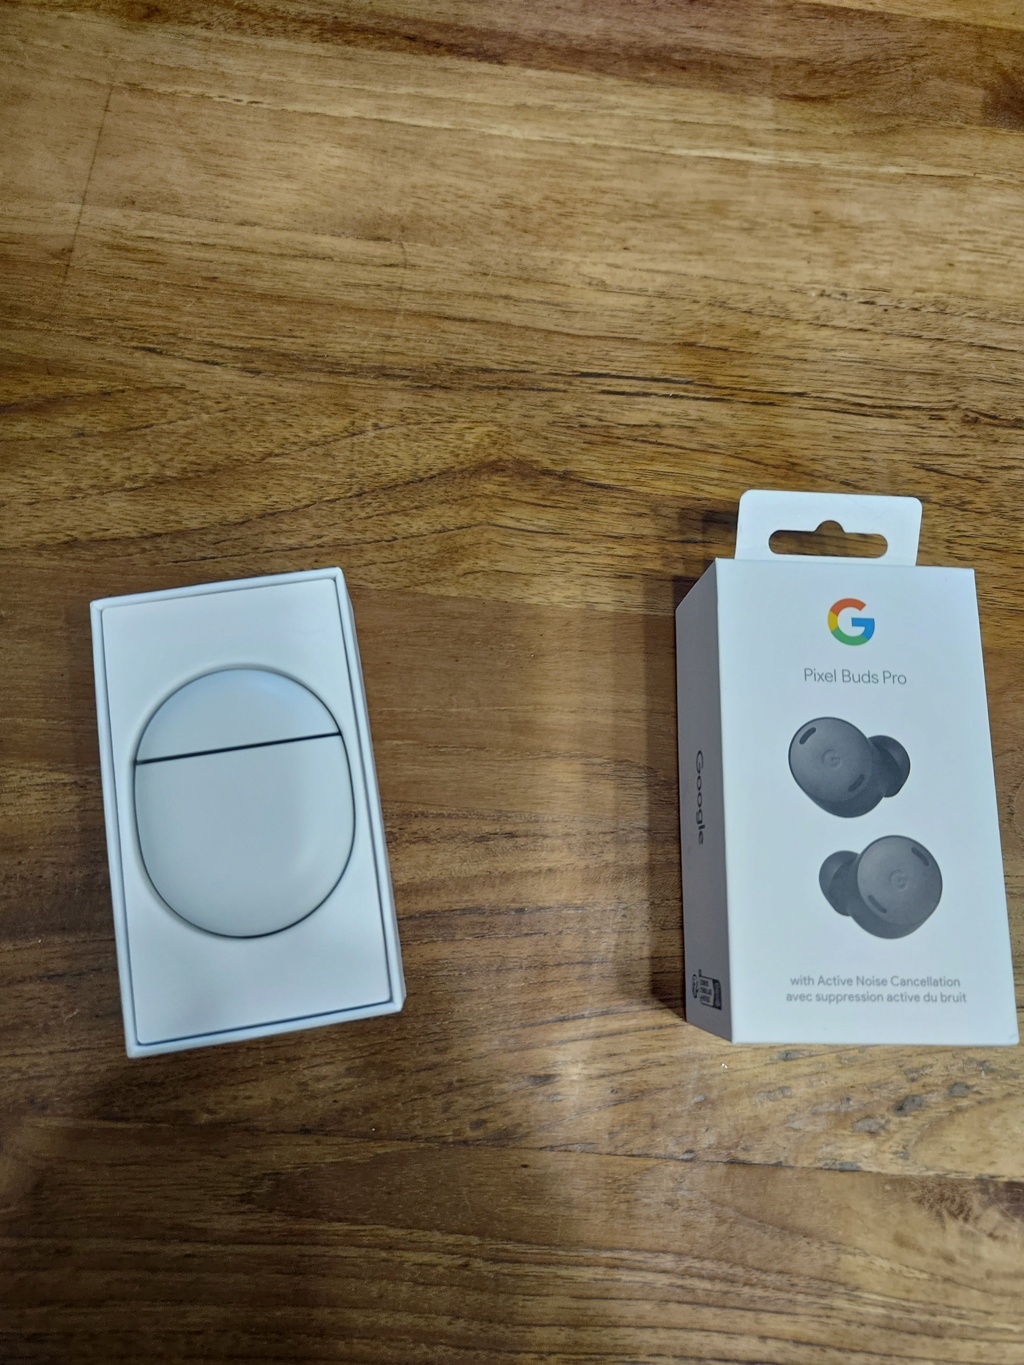 [Vds] Google Pixel Buds pro 2 neufs / Beoplay E8 2/ chassis drone fpv/ wifi mesh / Casque sennheiser / trackball Img_2012